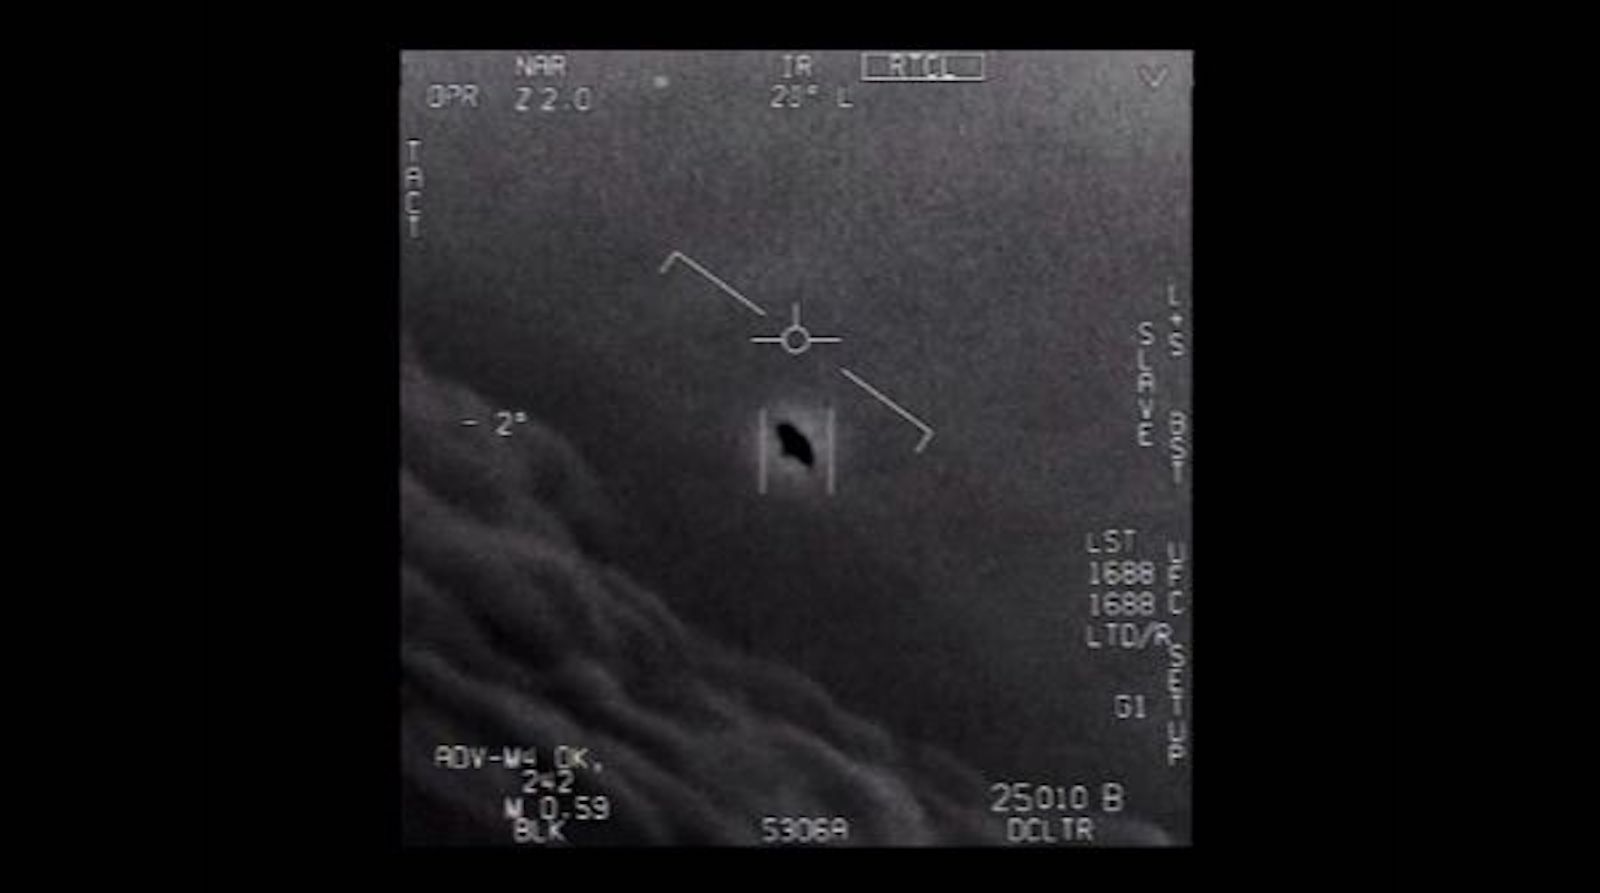 No, these aren't UFOs, but here's how you can try to spot them